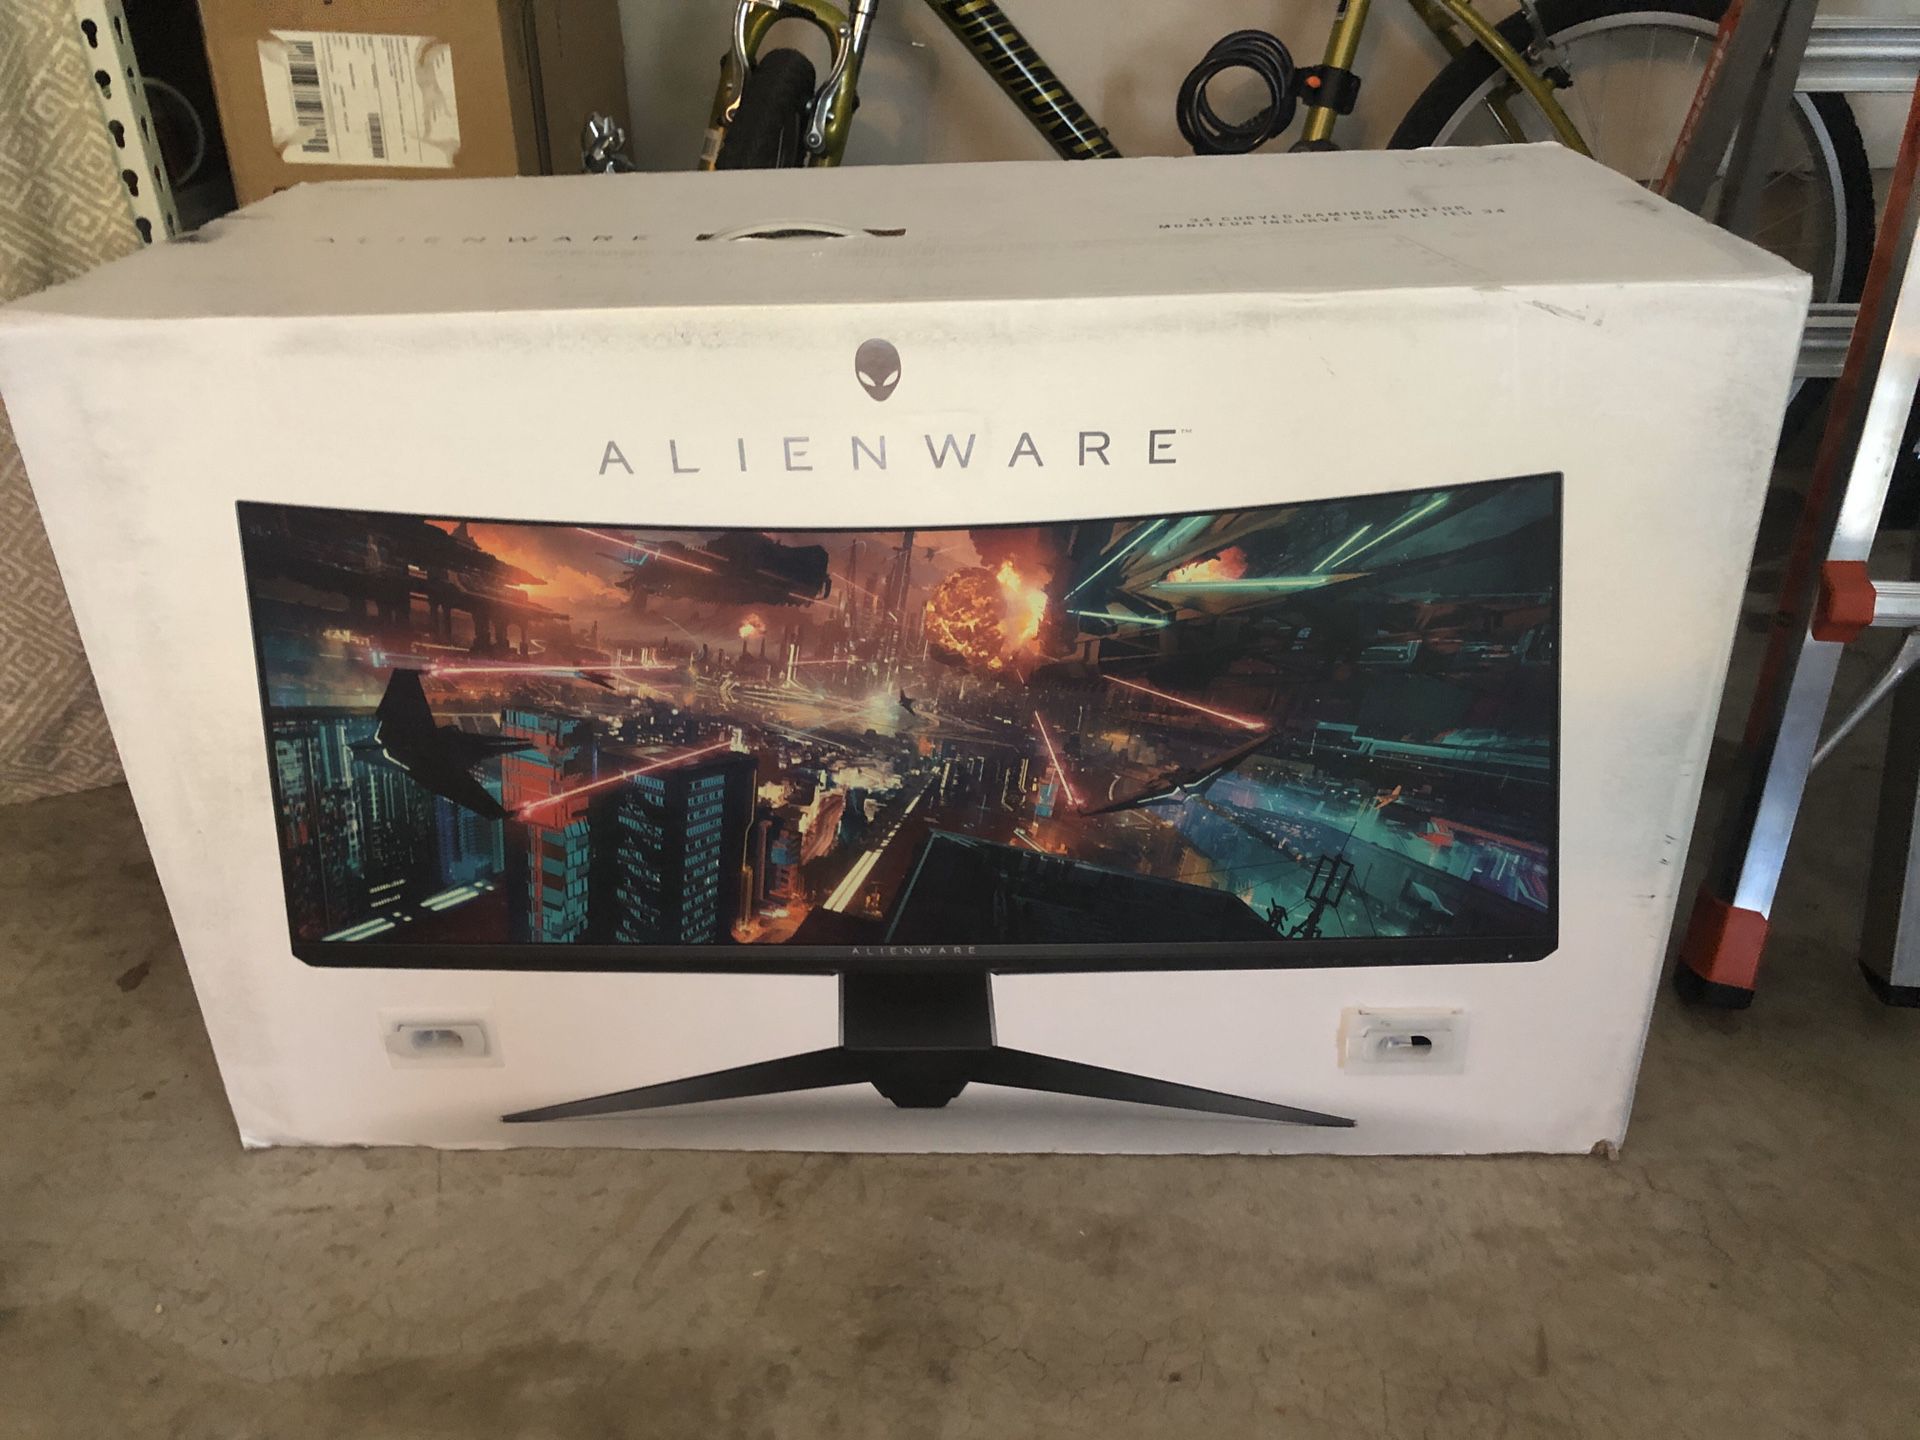 Brand New Dell Alienware 34" Curved Gaming Monitor (AW3418DW)